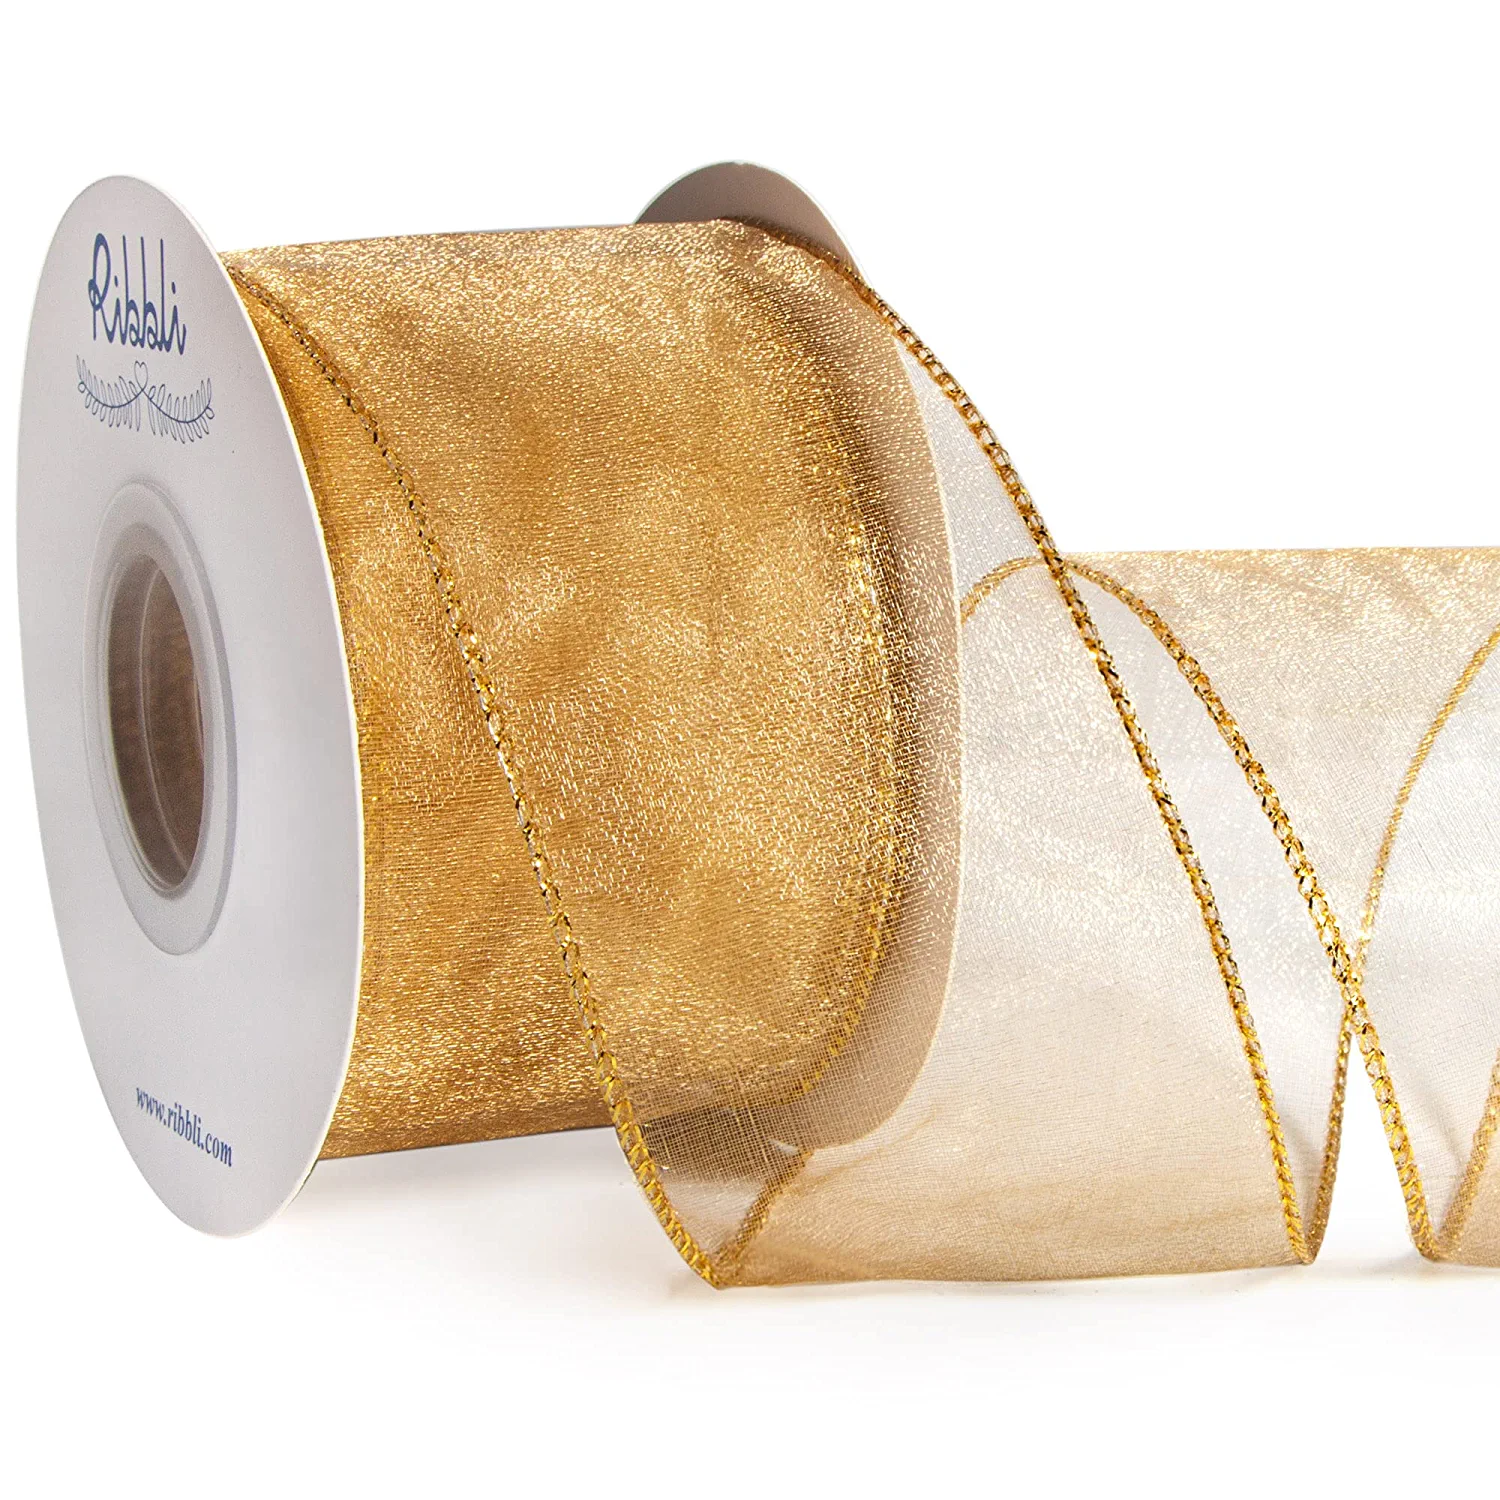 Wired Woven Shimmer Edge Metallic Sheer Ribbon - Perfect for Bows